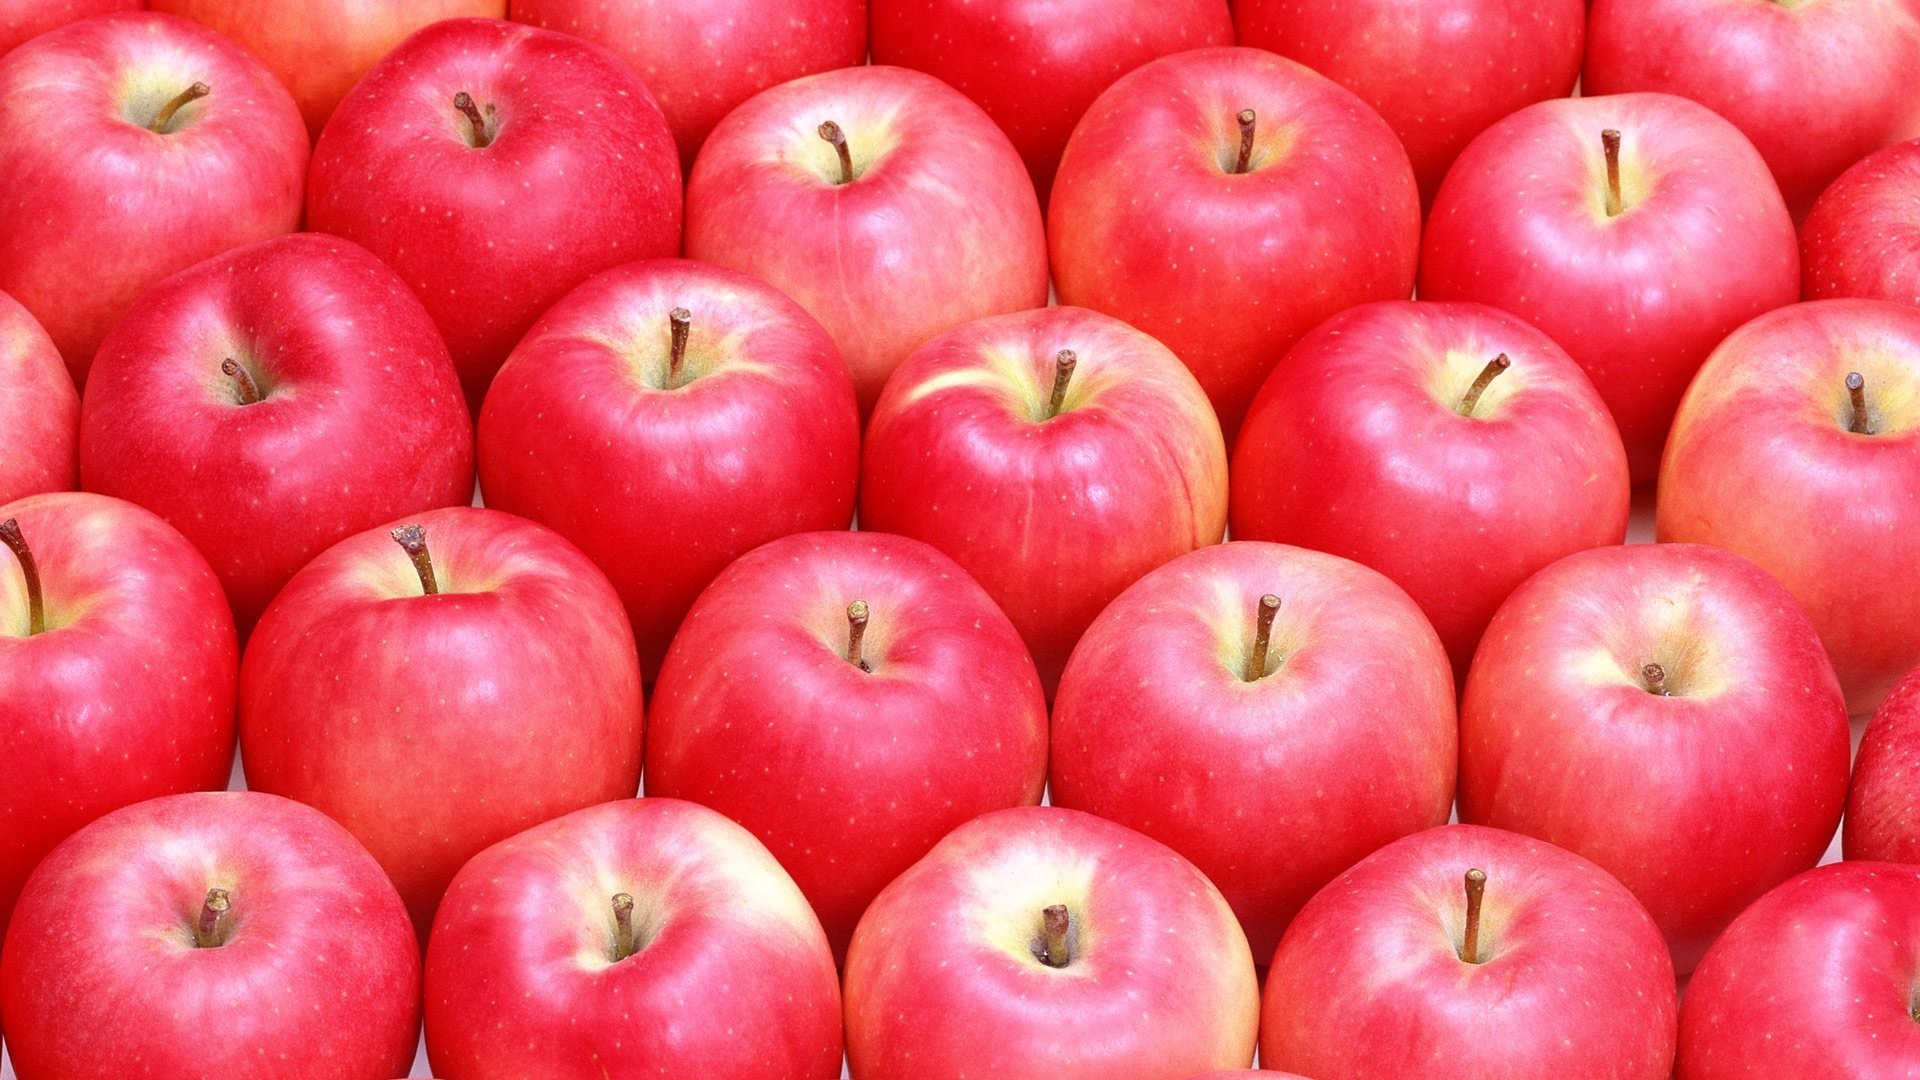 1920x1080 Apple Apples Red Hd Nature Computer Backgrounds - 